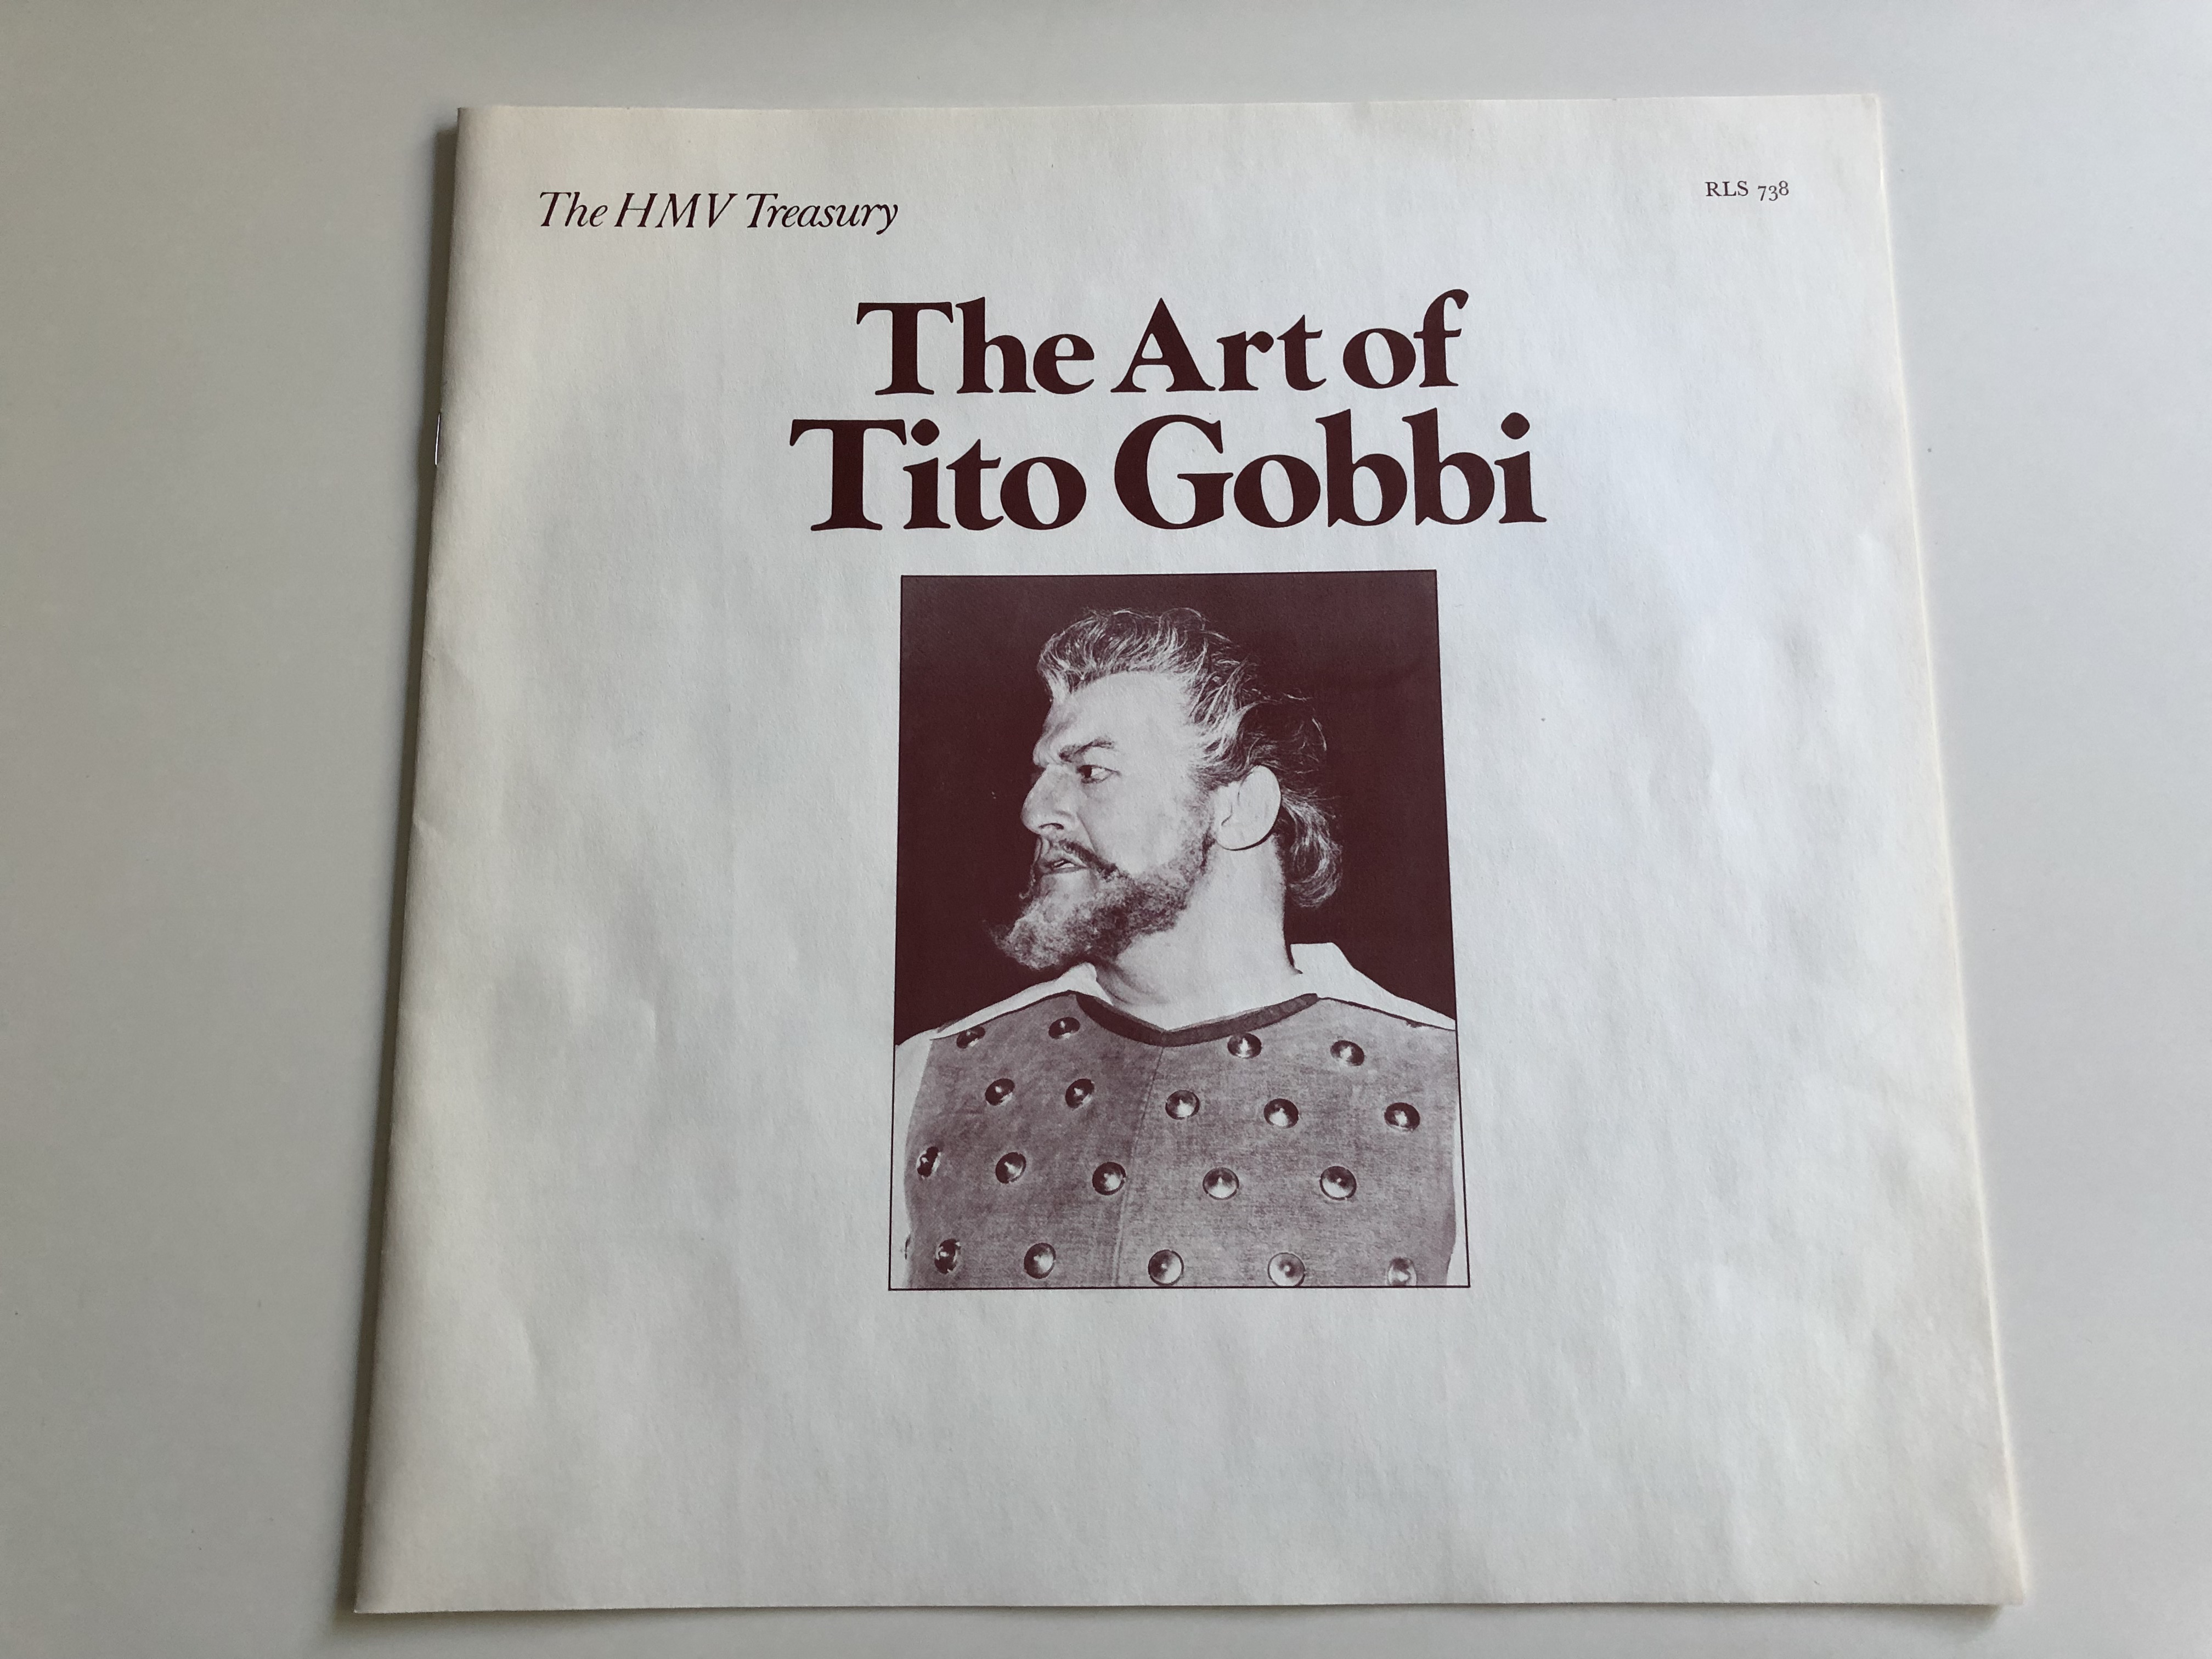 the-art-of-tito-gobbi-the-early-recordings-unpublished-recprdings-of-1955-italian-songs-his-master-s-voice-3x-lp-stereo-mono-rls-738-3-.jpg